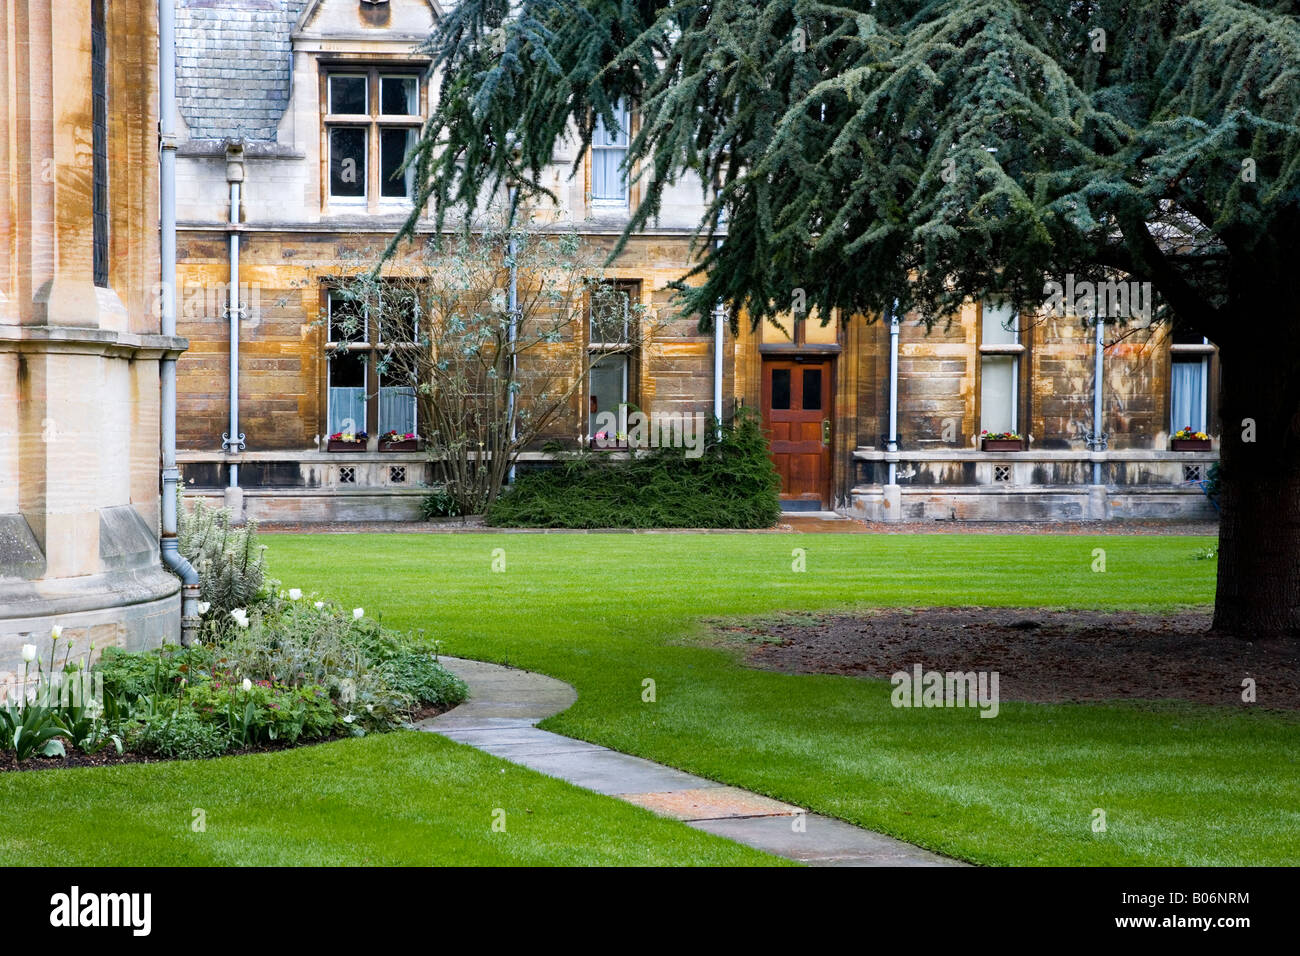 Part of the Quad known as the Tree Court at Gonville and Caius College, Cambridge University, Cambridge, England, UK Stock Photo